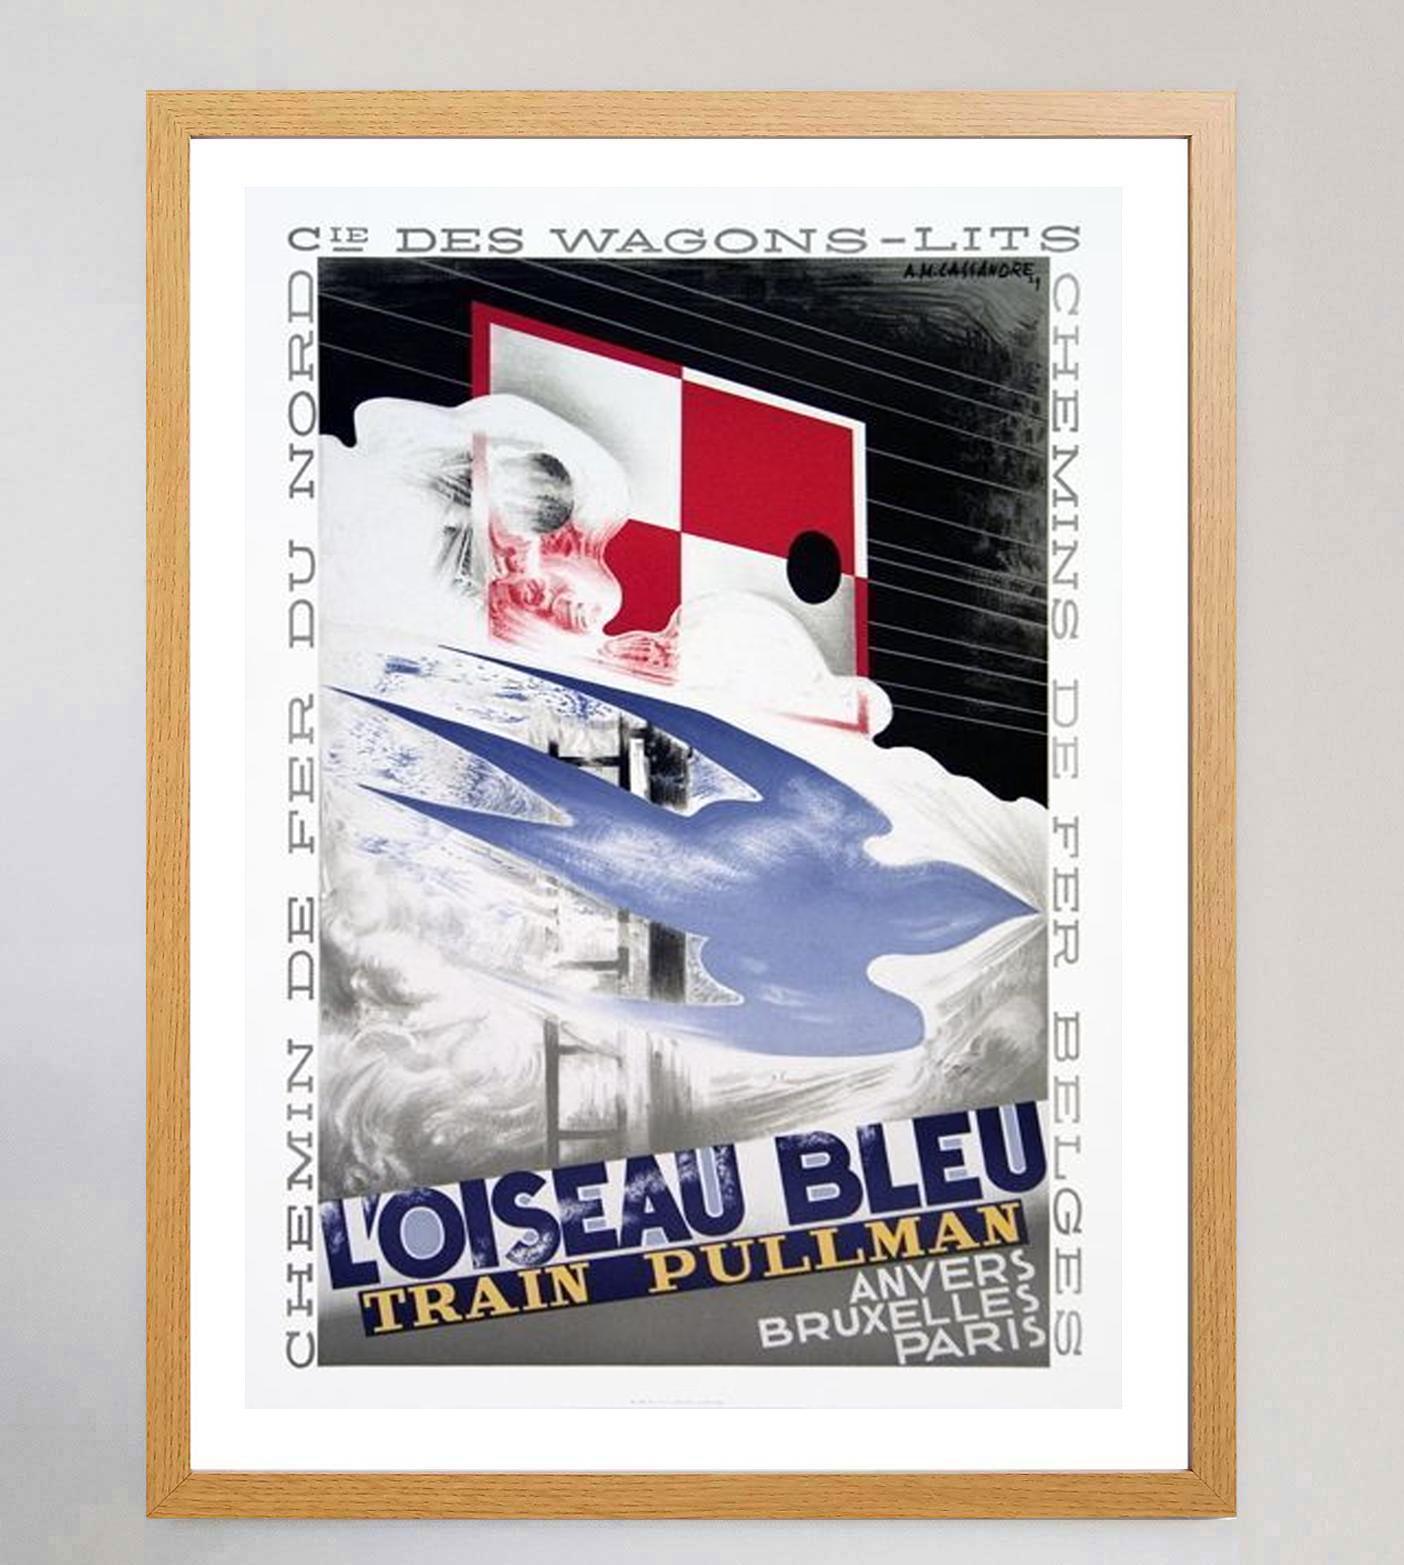 1989 L'Oiseau Bleu Train Pullman Original Vintage Poster In Good Condition For Sale In Winchester, GB